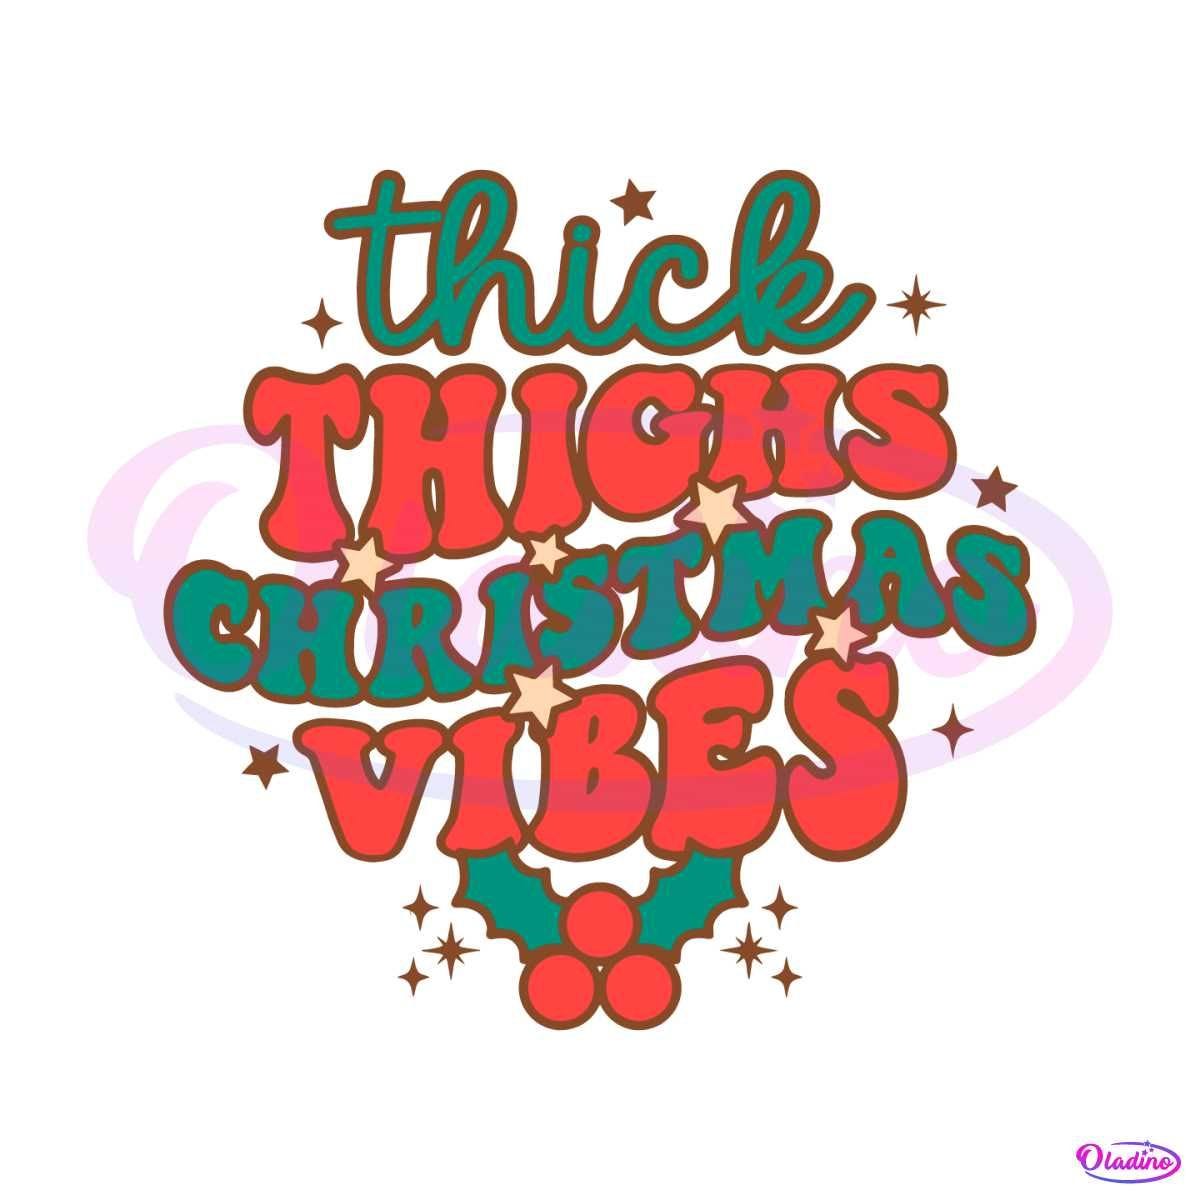 Thick Thighs Christmas Vibes SVG